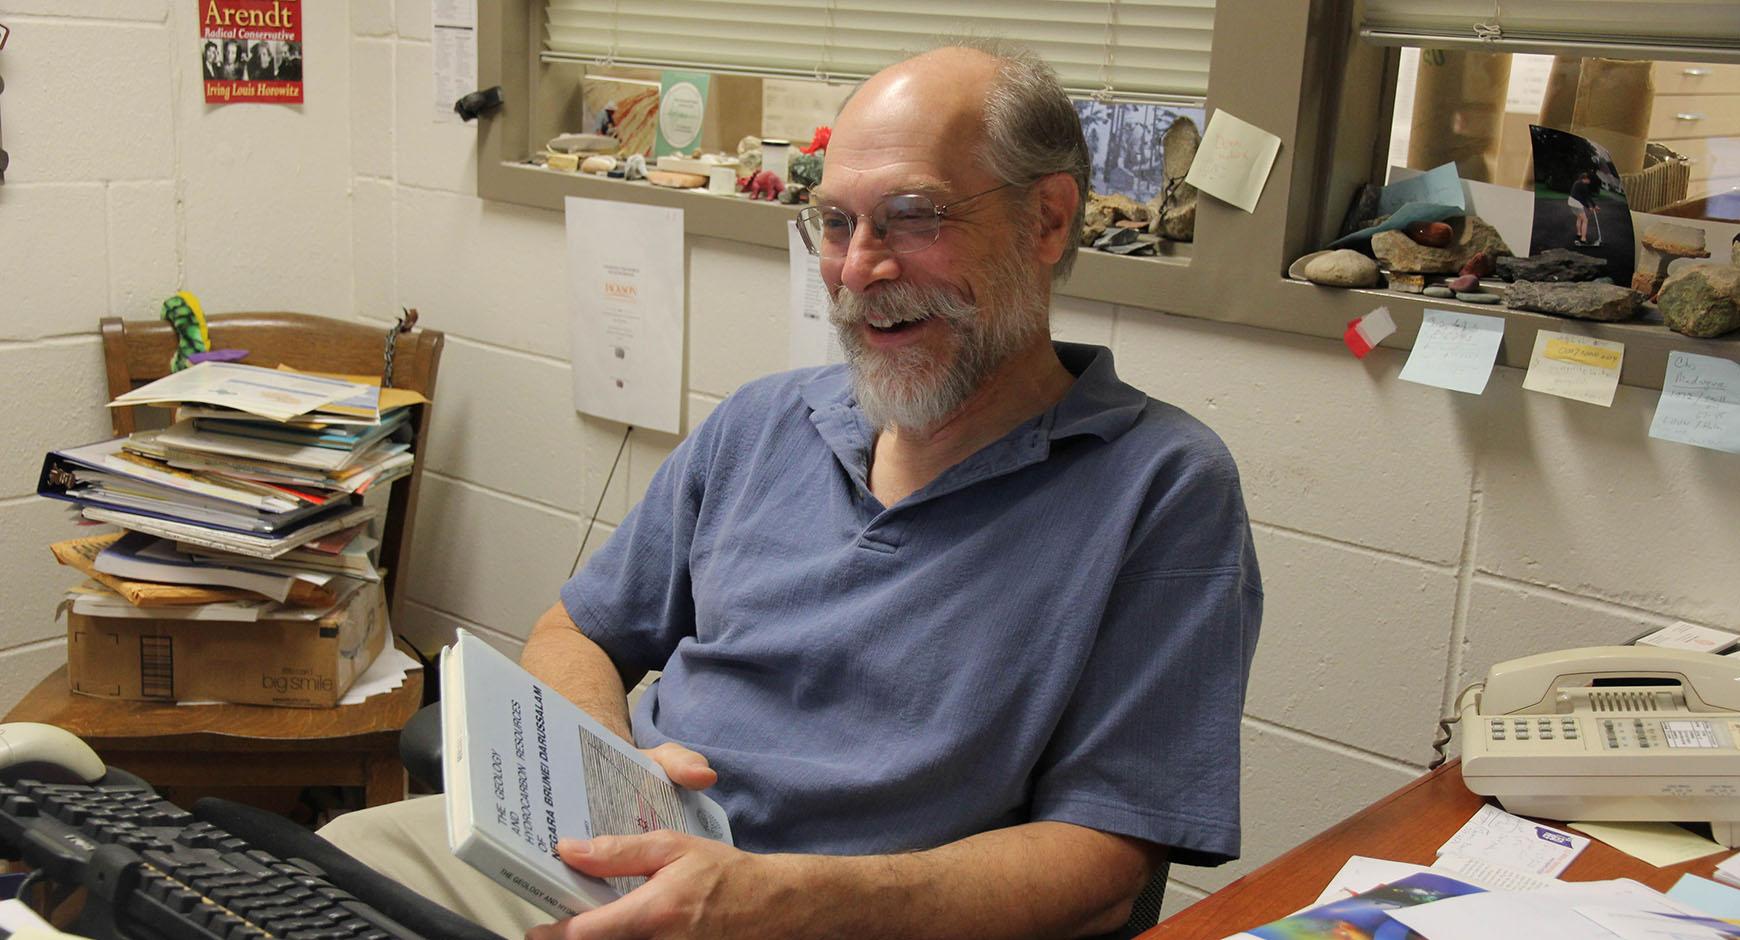 bearded man with glasses (dennis trombatore) smiling at desk with book in hands